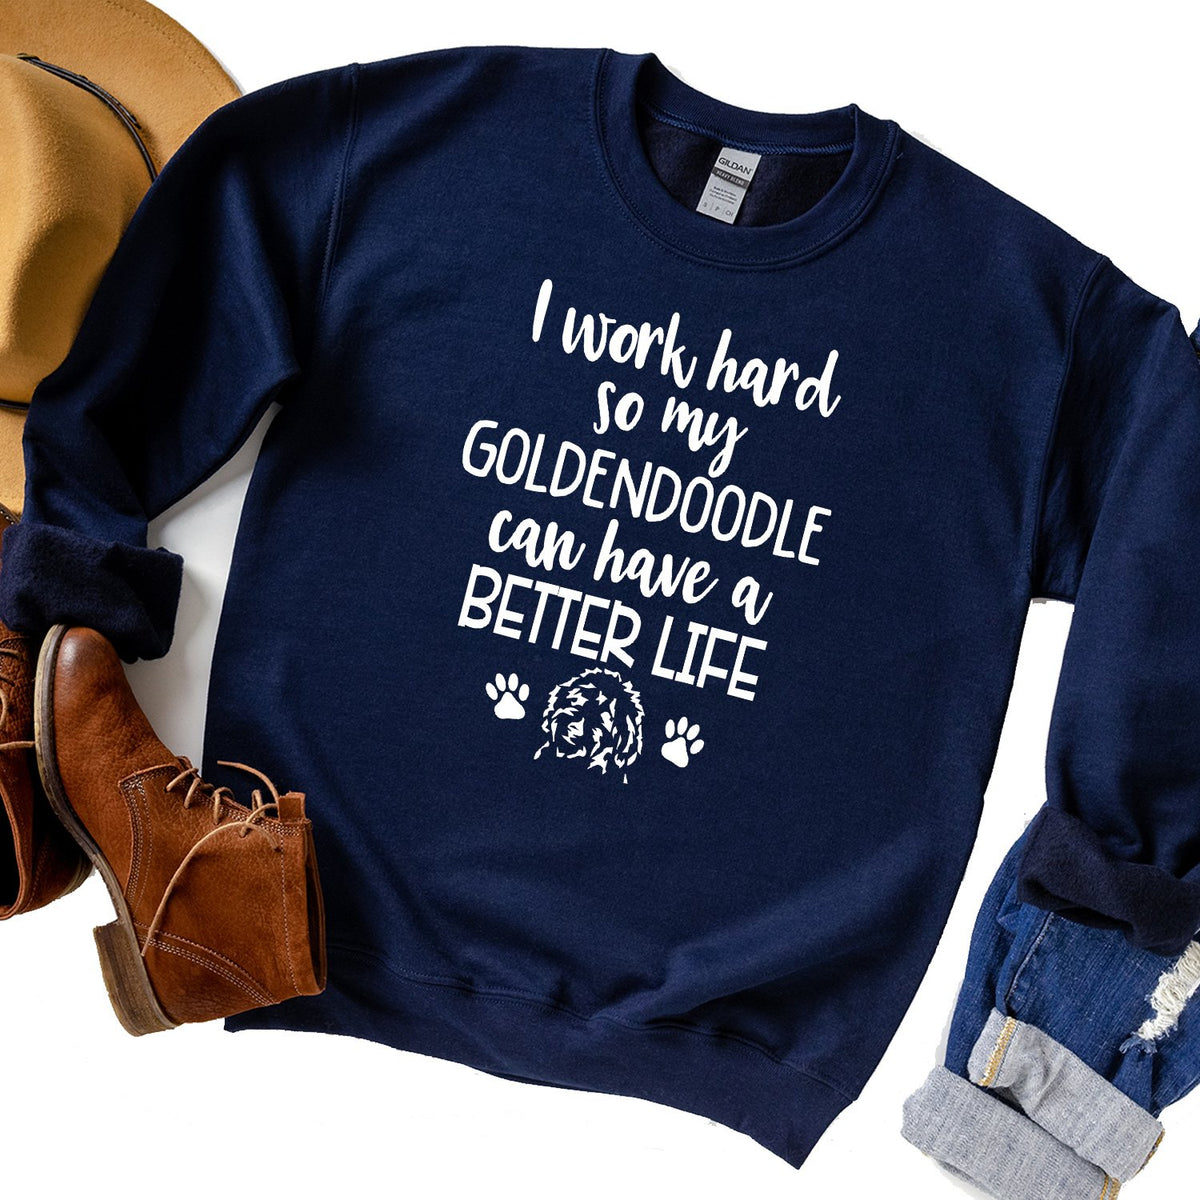 I Work Hard So My Goldendoodle Can Have A Better Life - Long Sleeve Heavy Crewneck Sweatshirt